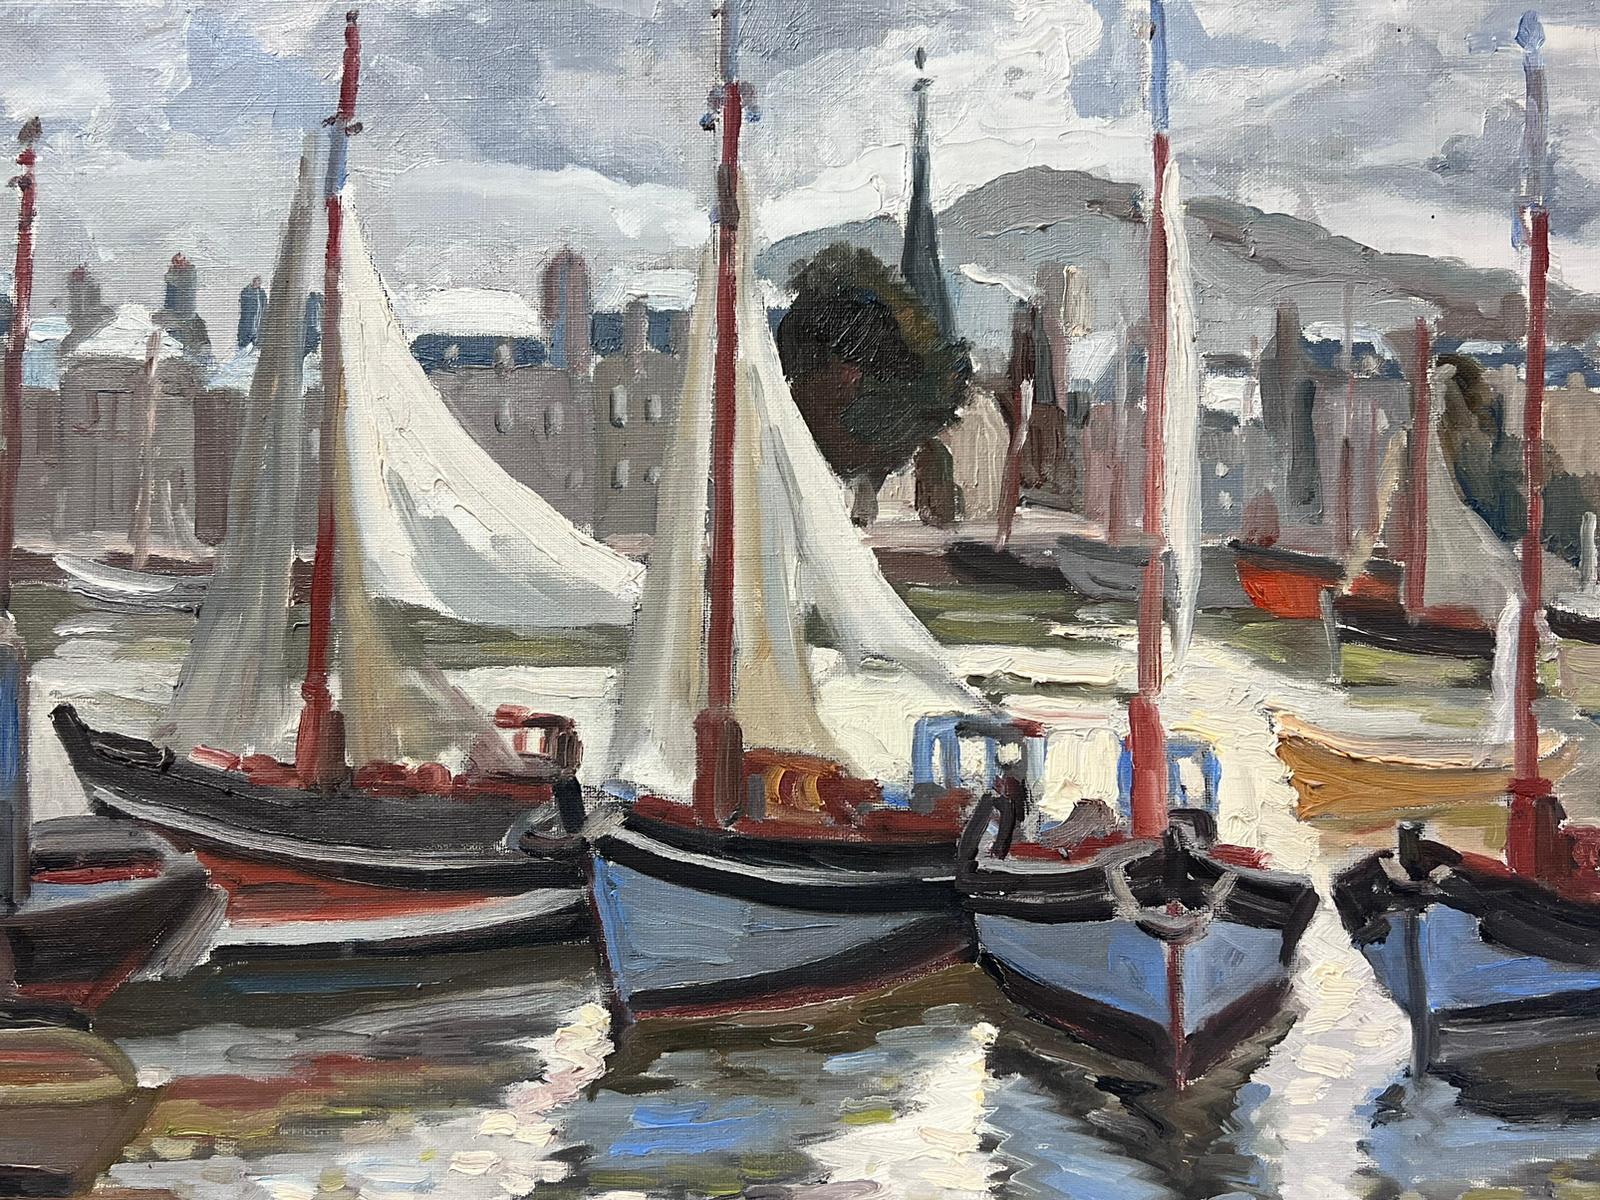 Honfleur
by Georges Bordonave (French contemporary) 
dated 1970
signed oil painting on canvas, unframed
canvas: 18 x 22 inches
condition: very good
provenance: from a large private collection of this artists work, western Paris, France. 